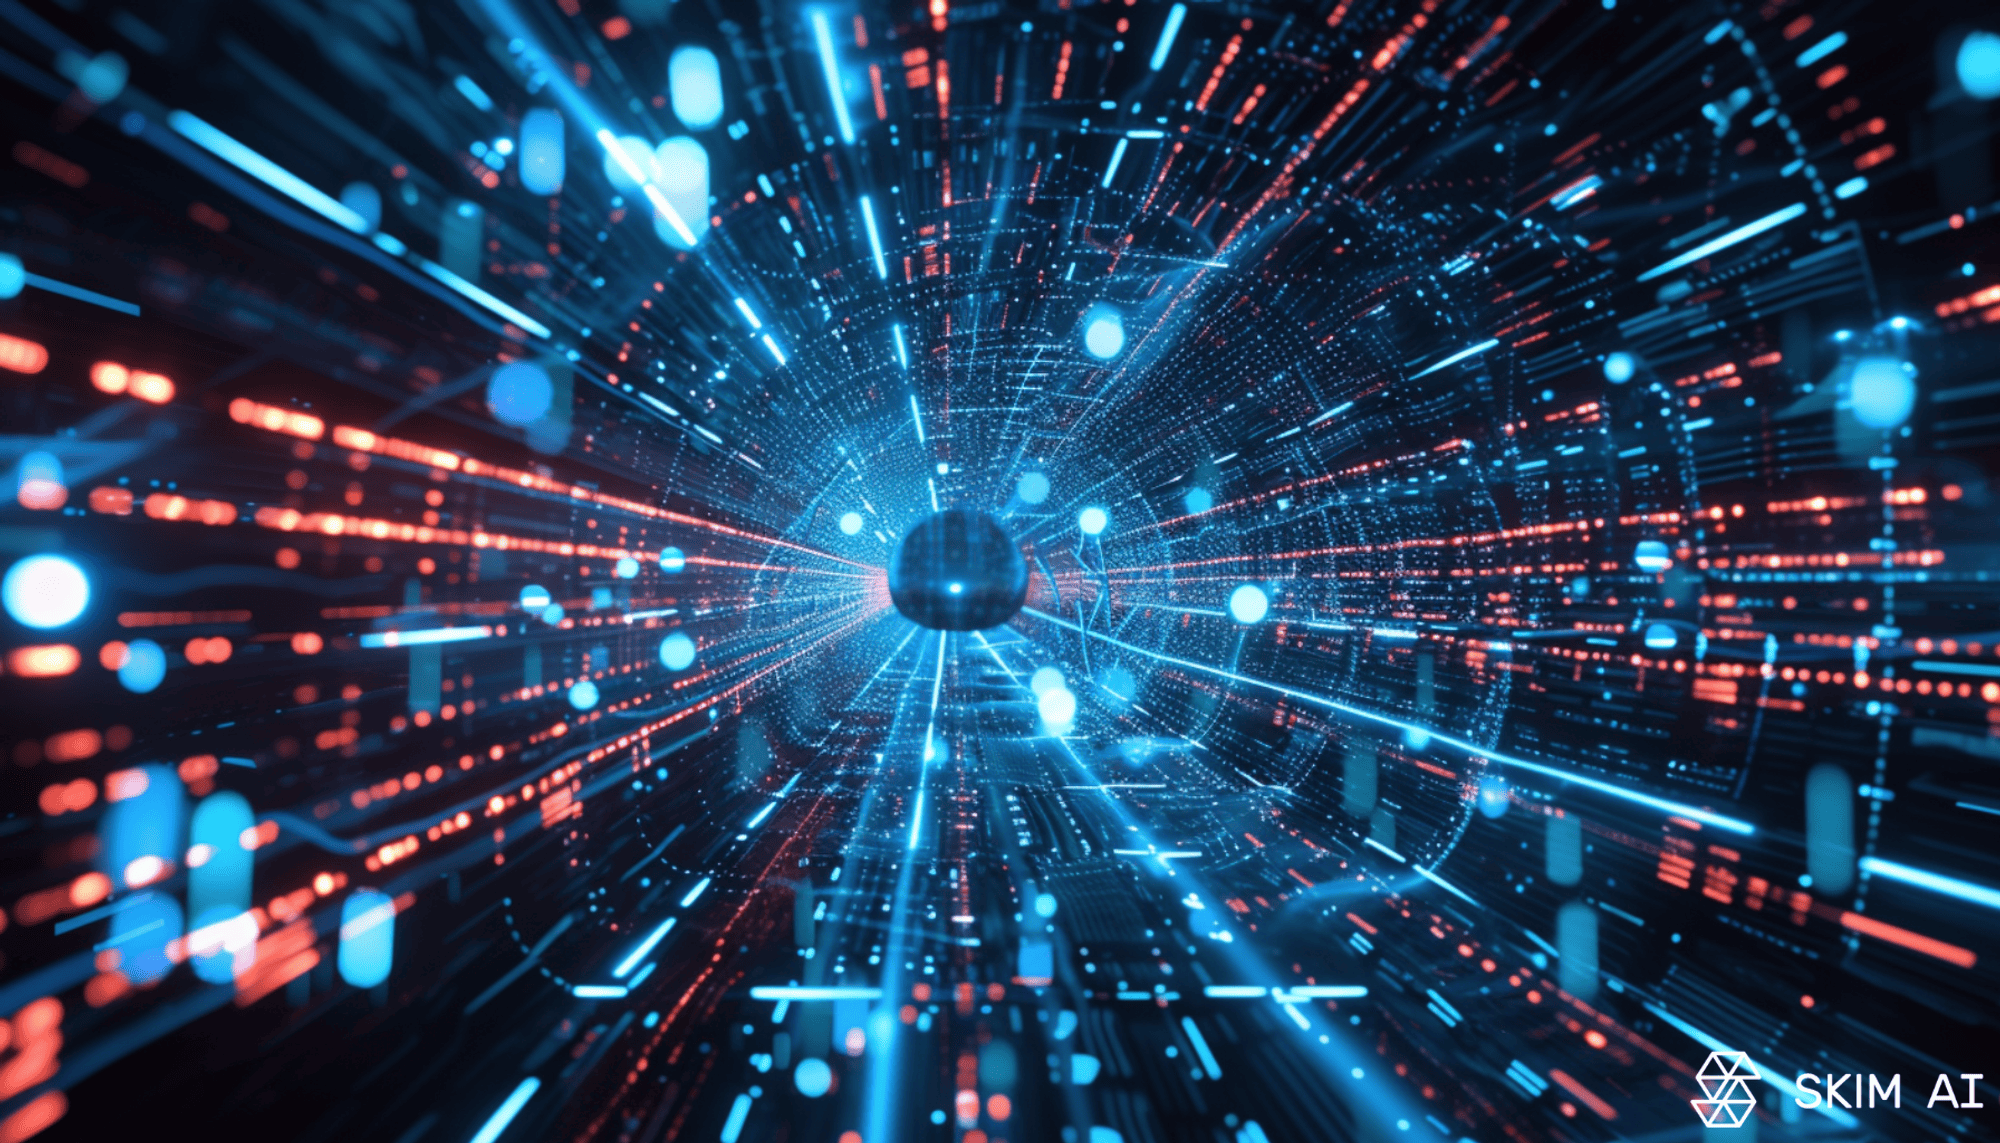 digital tunnel with a central sphere surrounded by streaks of light